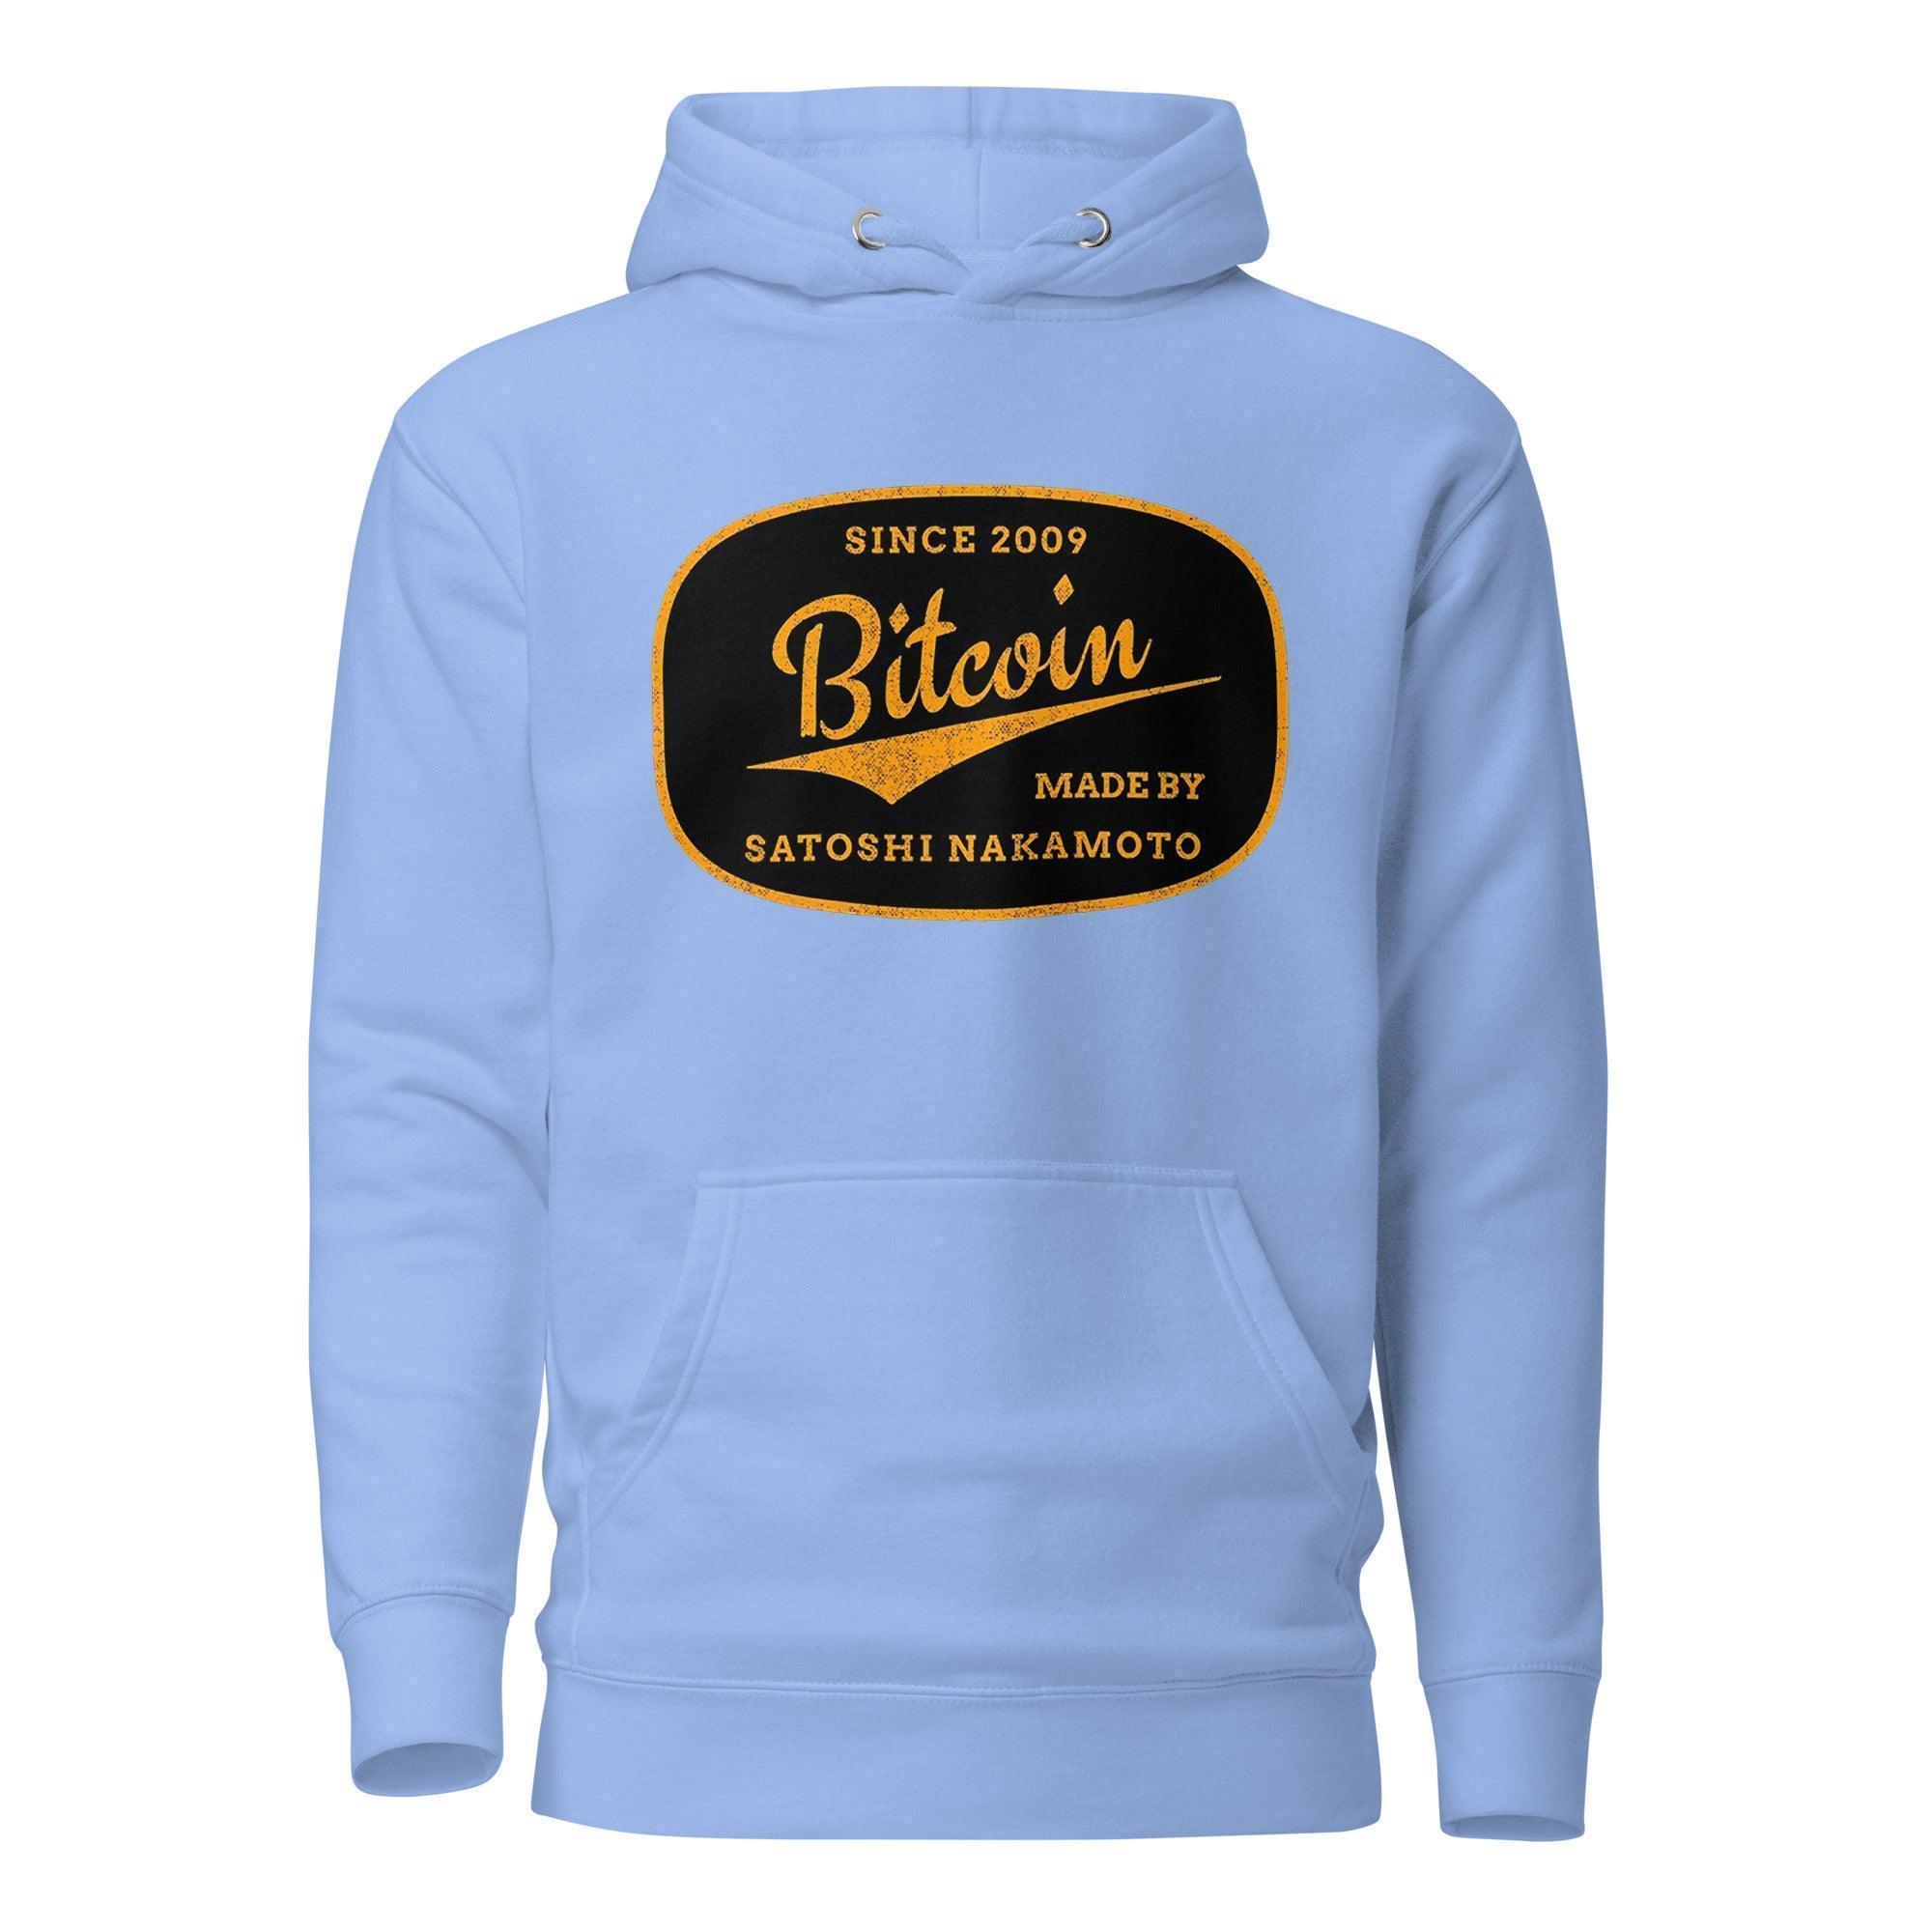 Bitcoin Since 2009 Pullover Hoodie - InvestmenTees